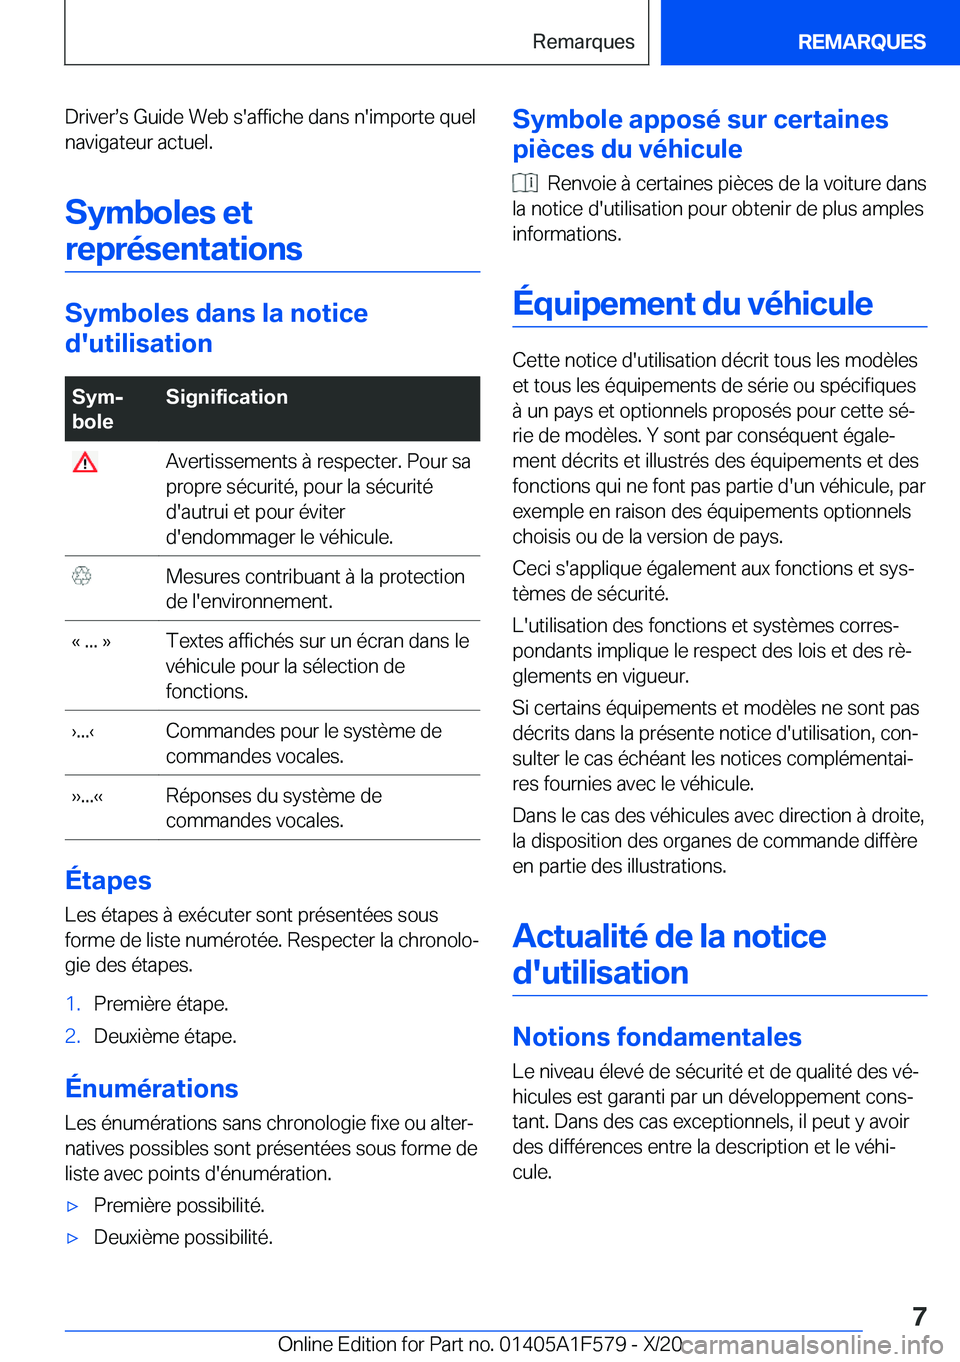 BMW X3 M 2021  Notices Demploi (in French) �D�r�i�v�e�rs�s��G�u�i�d�e��W�e�b��s�'�a�f�f�i�c�h�e��d�a�n�s��n�'�i�m�p�o�r�t�e��q�u�e�l�n�a�v�i�g�a�t�e�u�r��a�c�t�u�e�l�.
�S�y�m�b�o�l�e�s��e�t�r�e�p�r�é�s�e�n�t�a�t�i�o�n�s
�S�y�